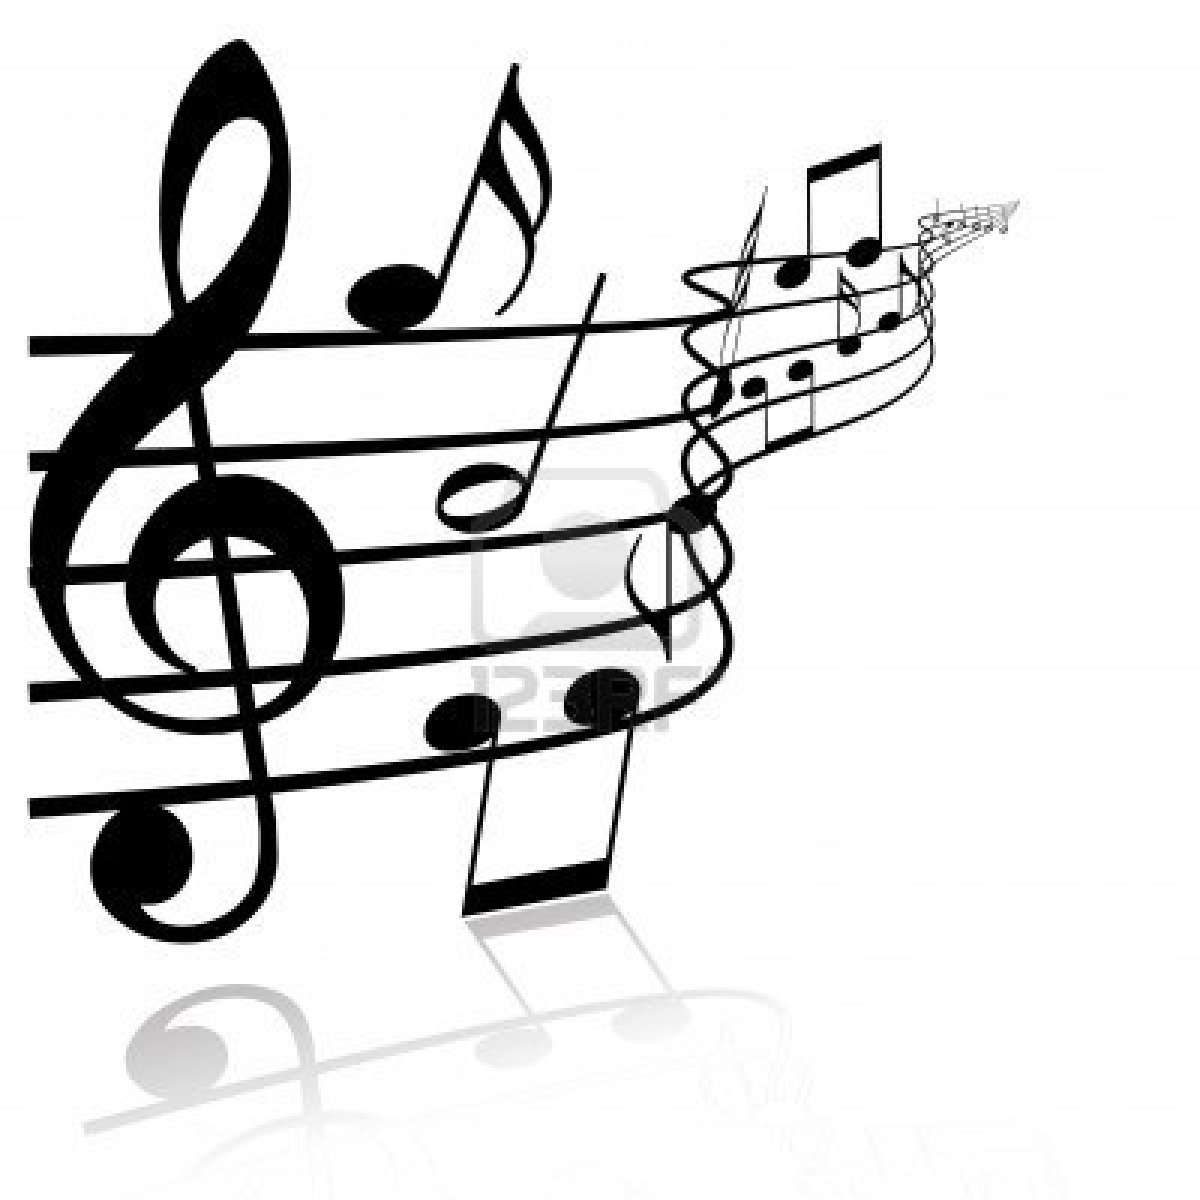 music notes clip art free download - photo #49